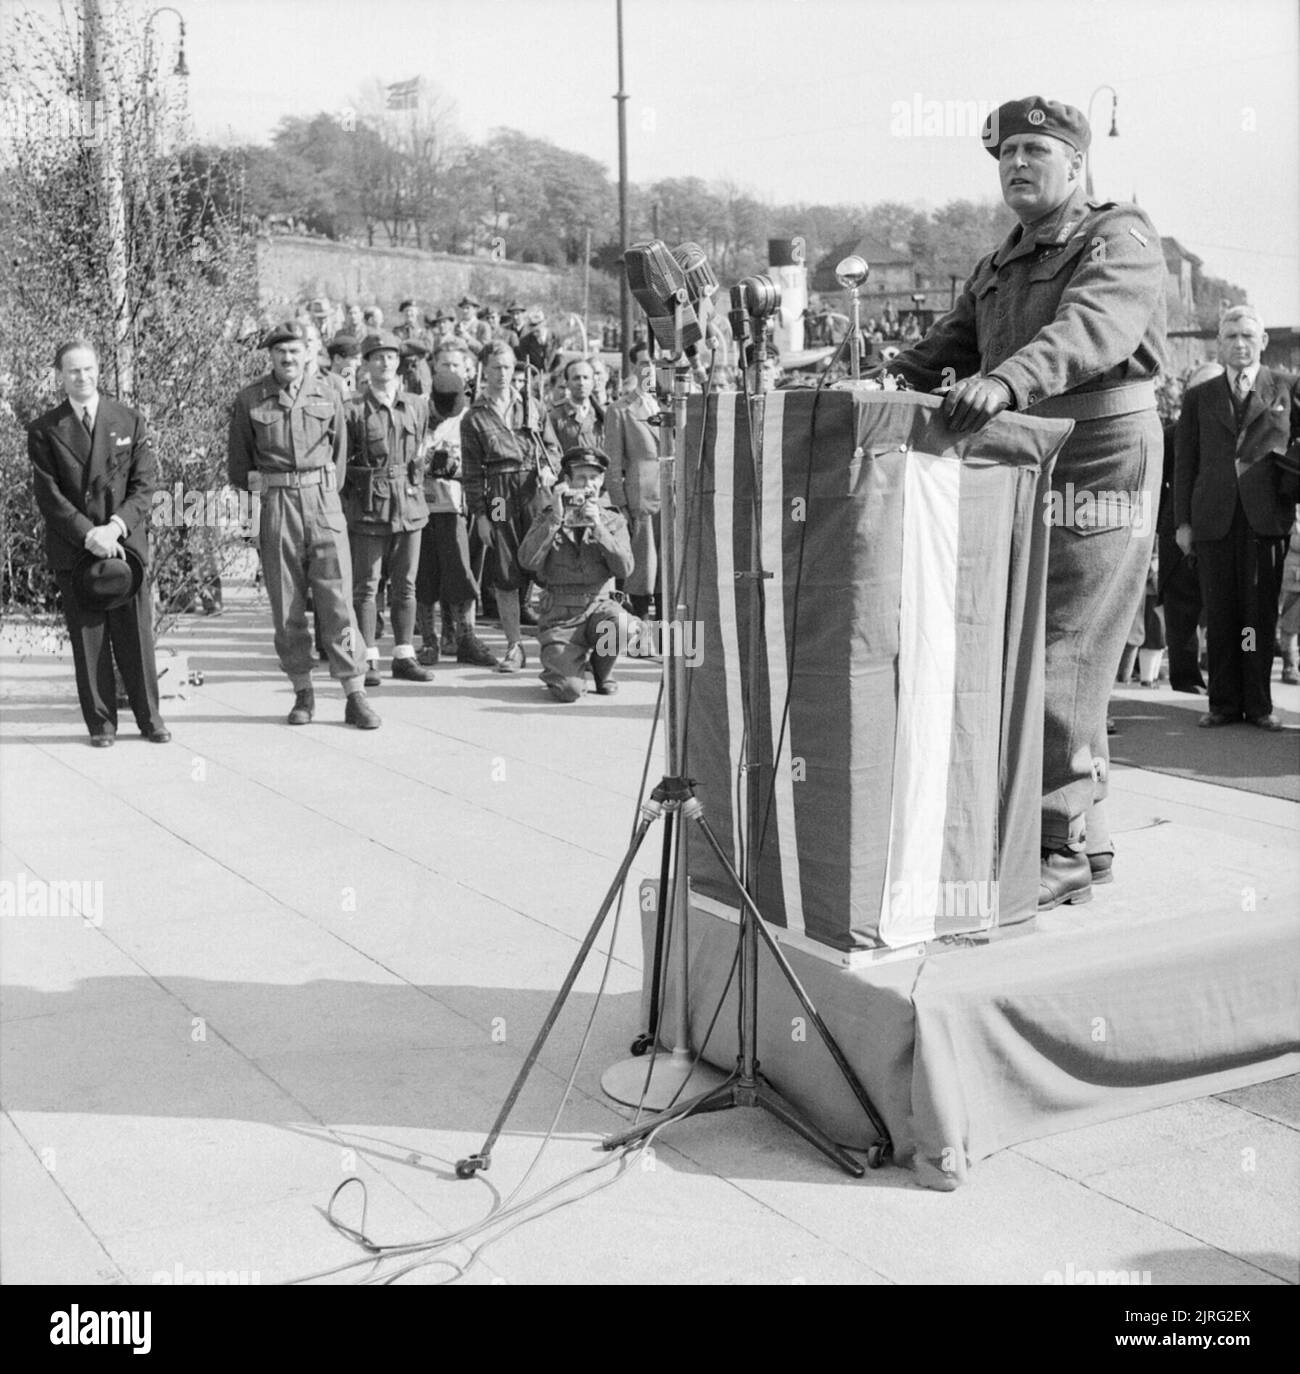 The Norwegian Government in Exile during the Second World War HRH Crown Prince Olaf in battle-dress addressing the welcoming crowd on the quayside at Oslo following his journey home on a British destroyer, accompanied by Major General Urquhart CBE DSO, Commanding 1st Airborne Division. Stock Photo